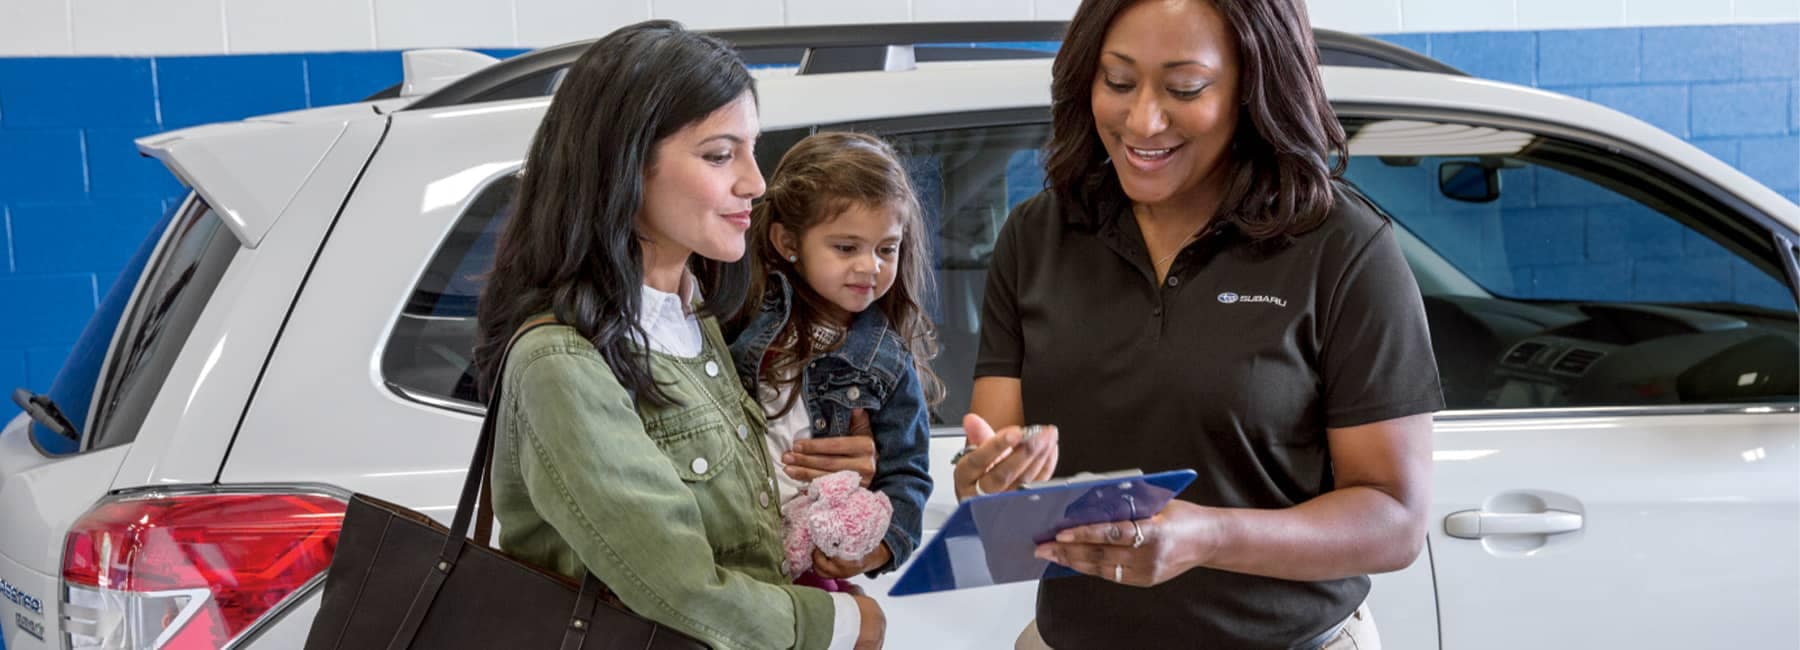 Subaru Advisor discussing options with a female customer and her child